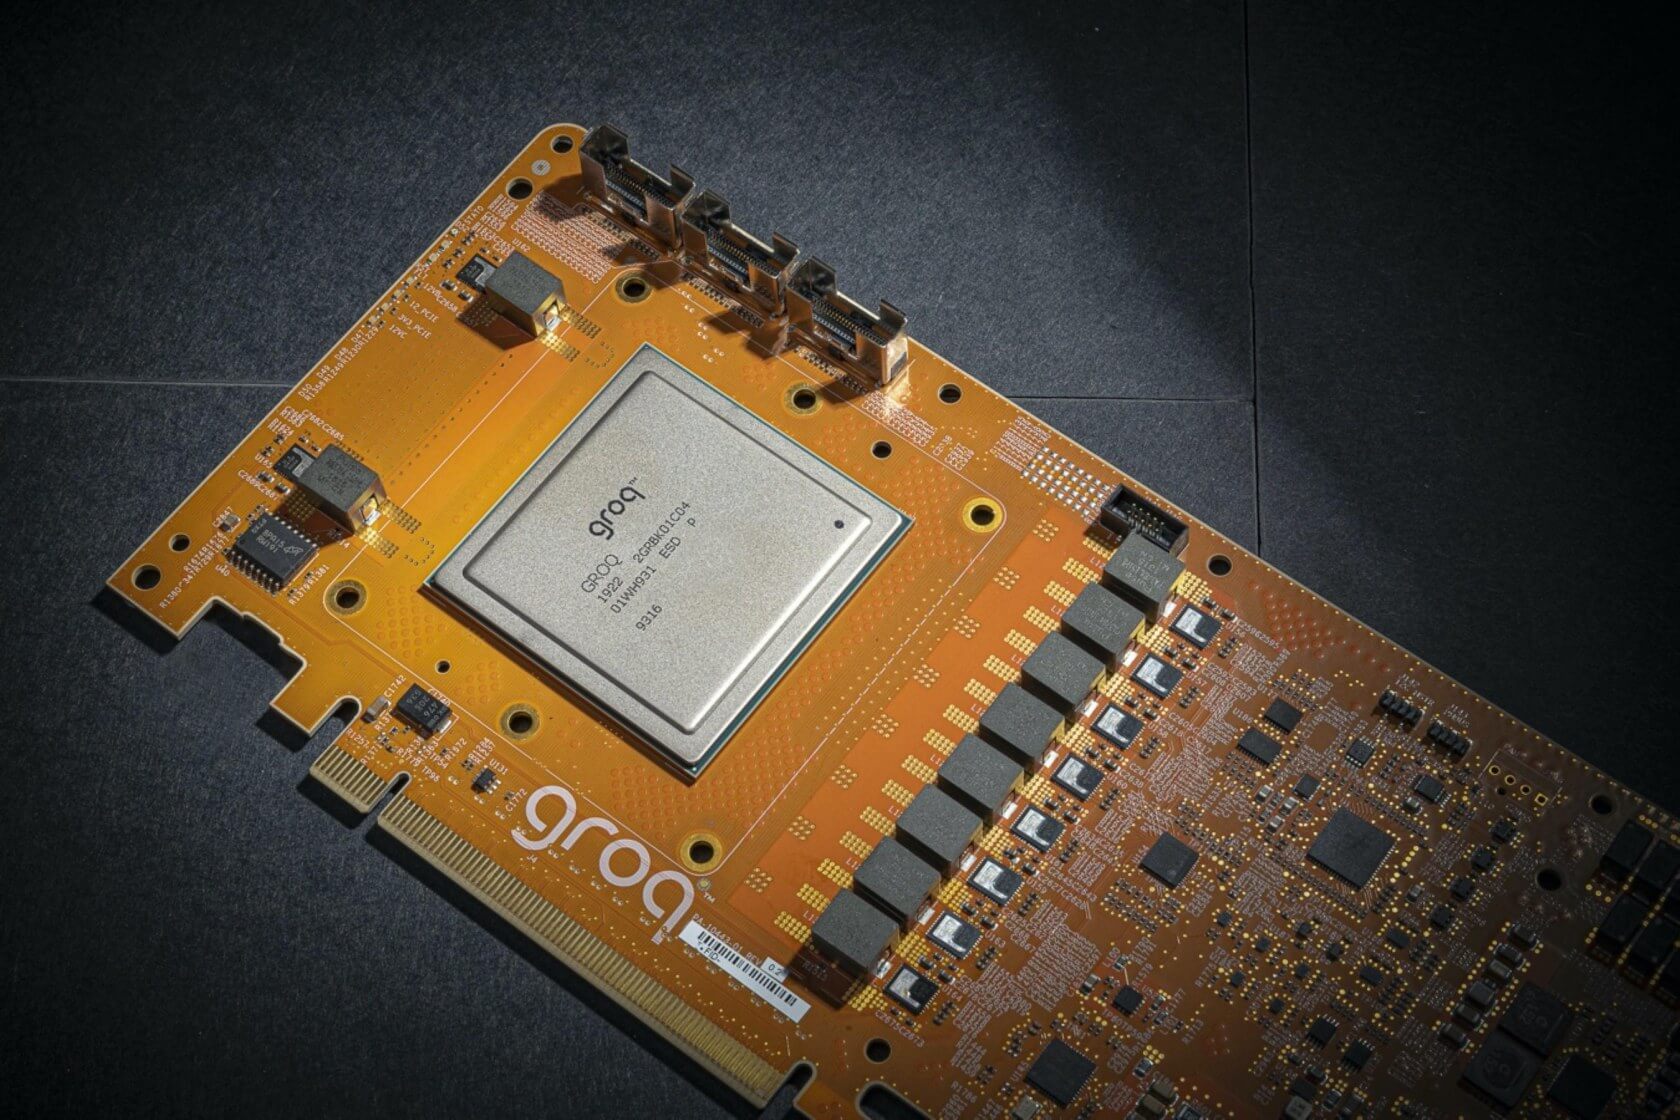 Groq launches the first AI accelerator card capable of 1 PetaOPS